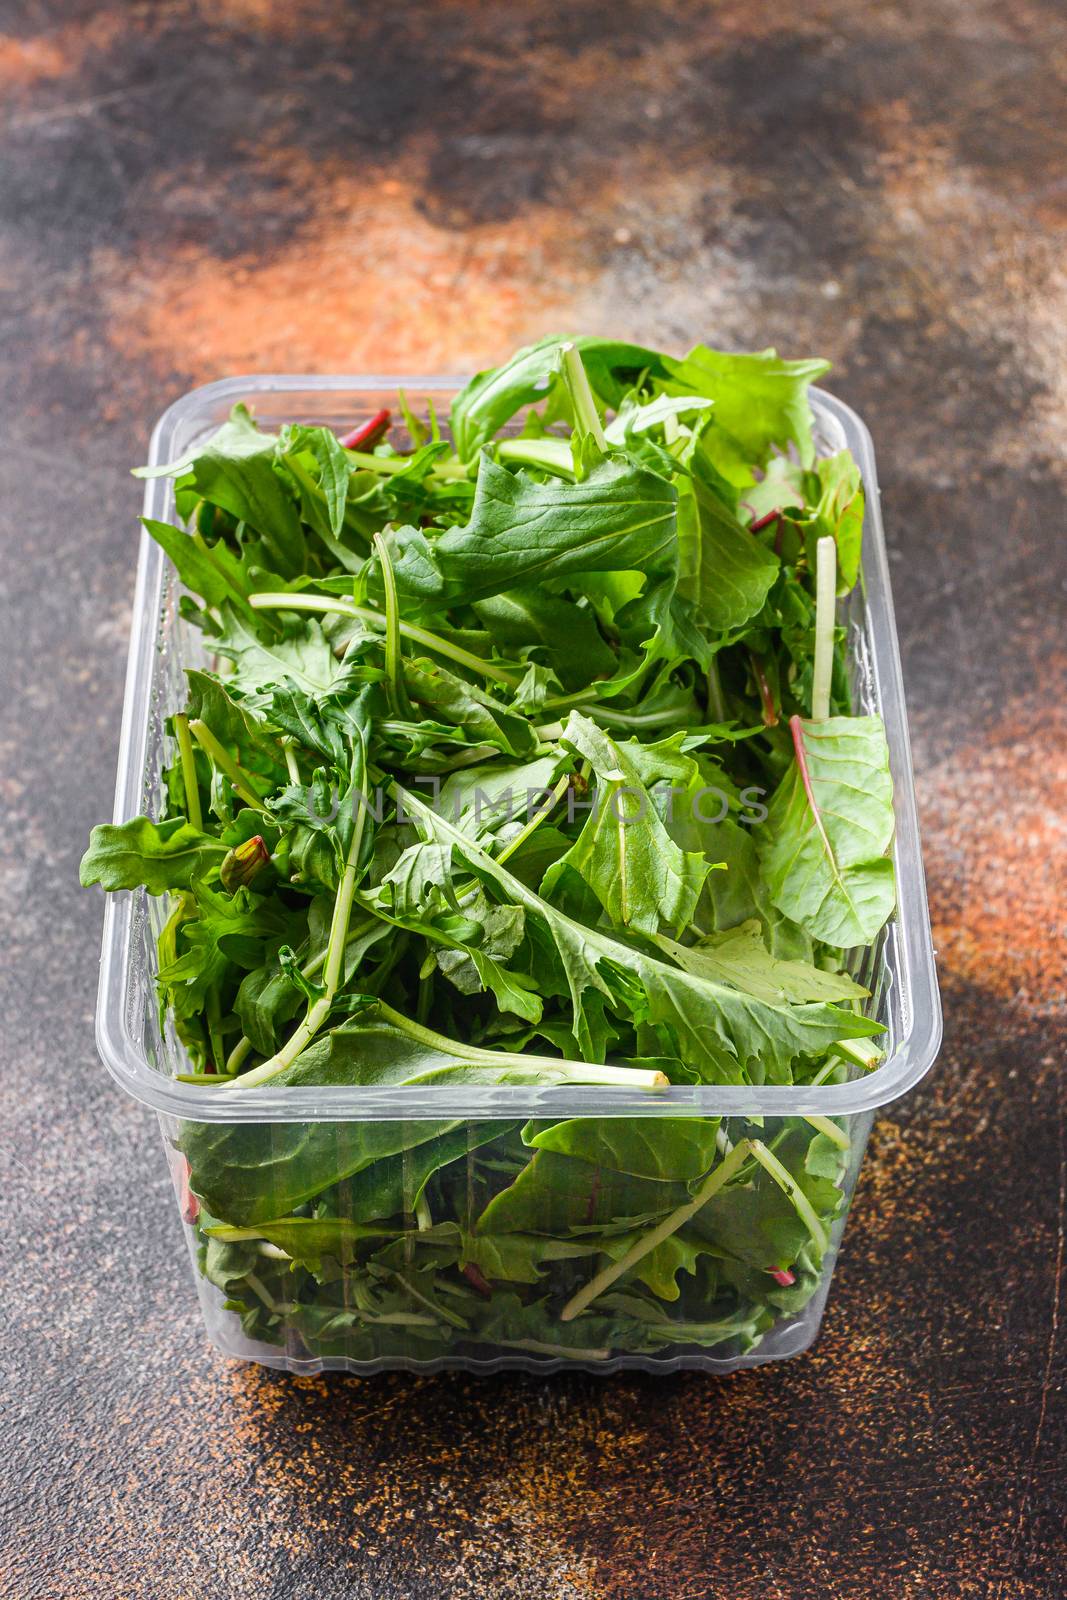 Organic Arugula Chard and Mizuna salad mix in plastic container side view. by Ilianesolenyi